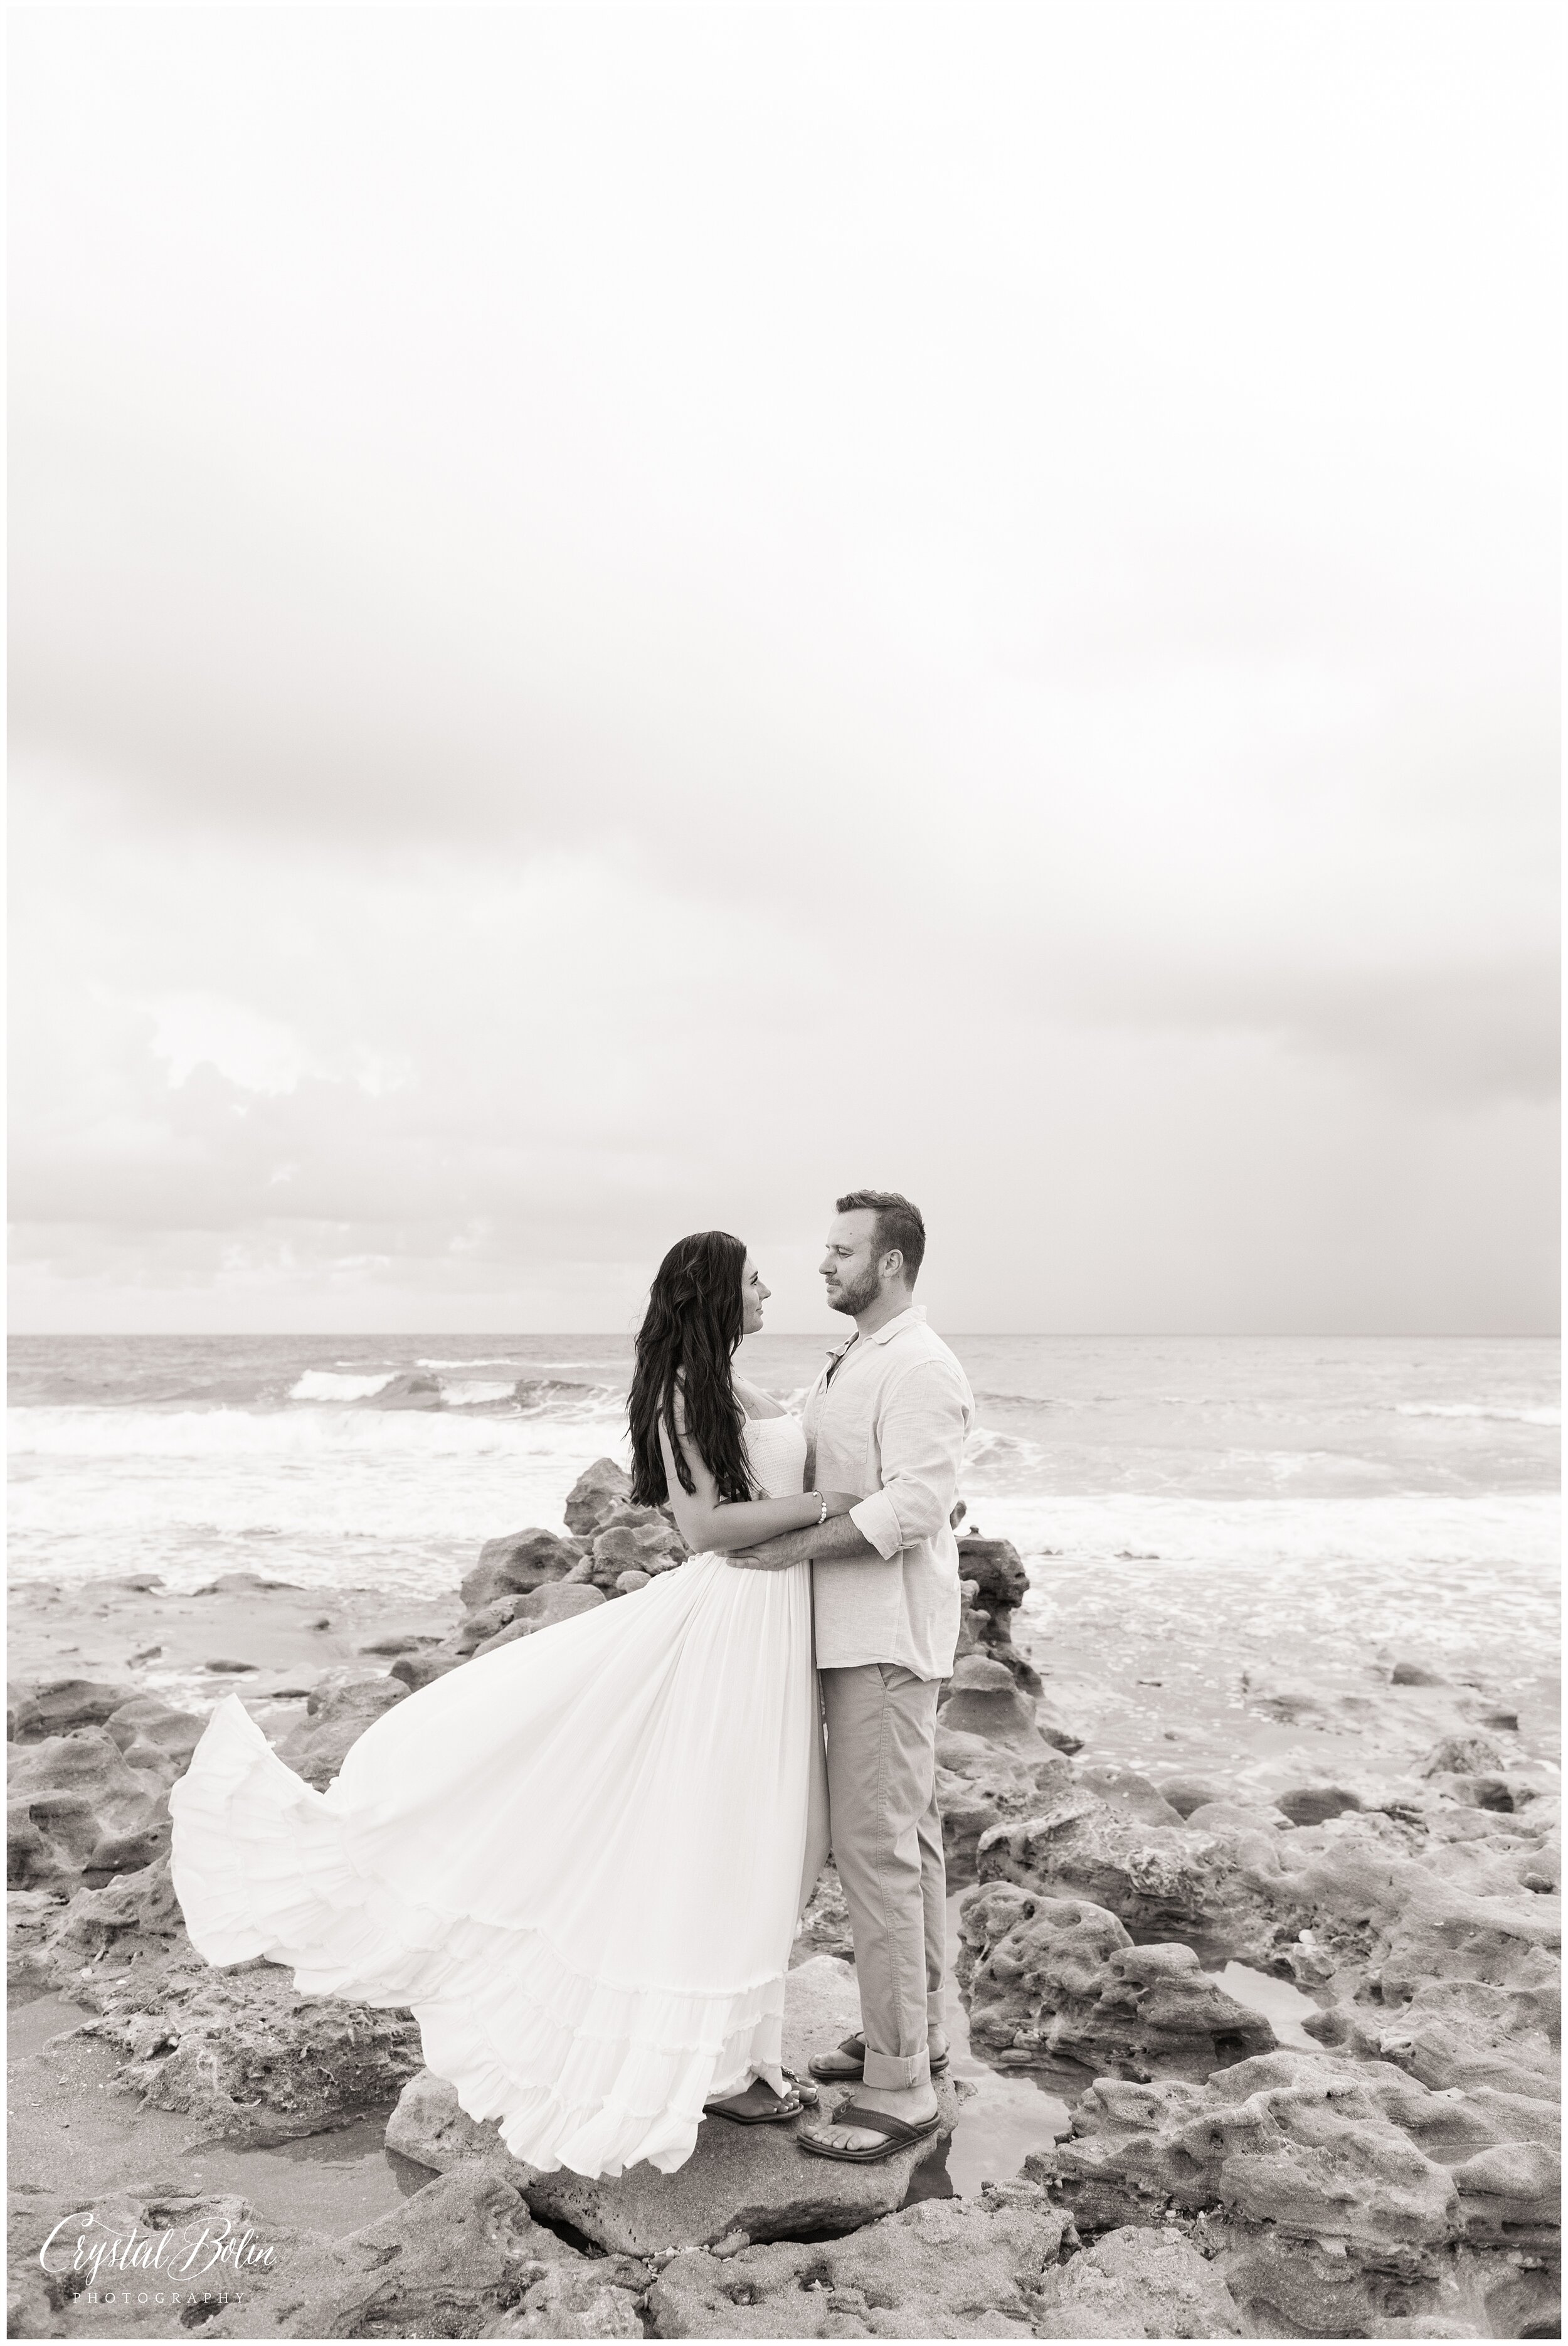 Alex & Gavin's Engagement Photos at Coral Cove Park in Jupiter, 